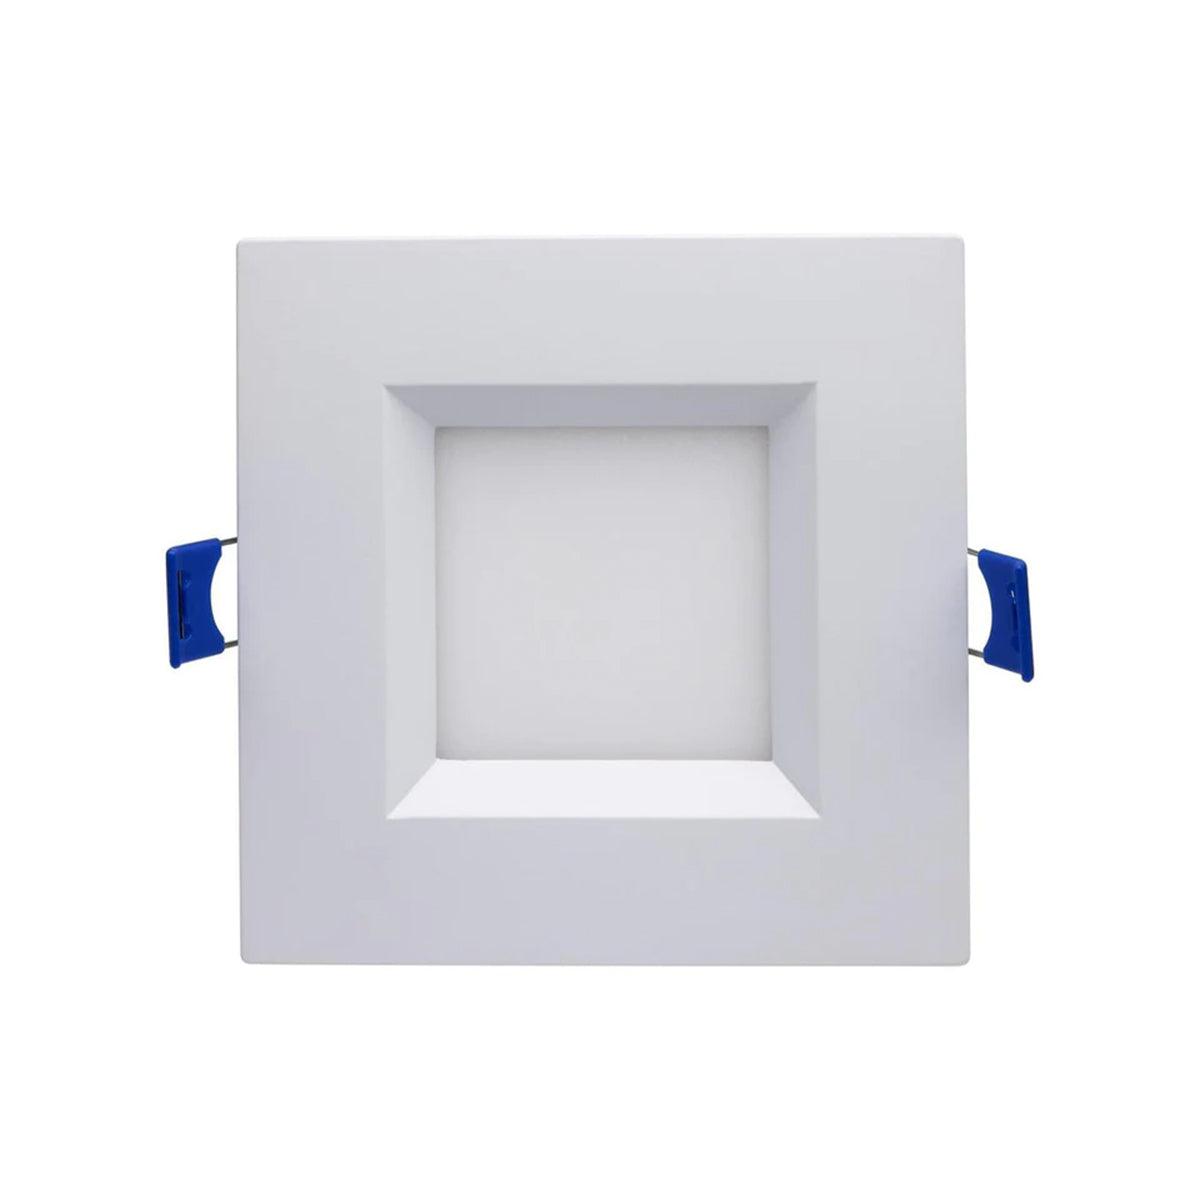 Slim Fit Canless LED Recessed Light, 4 Inch, Square, 12 Watt, 750 Lumens, Selectable CCT, 2700K to 5000K - Bees Lighting